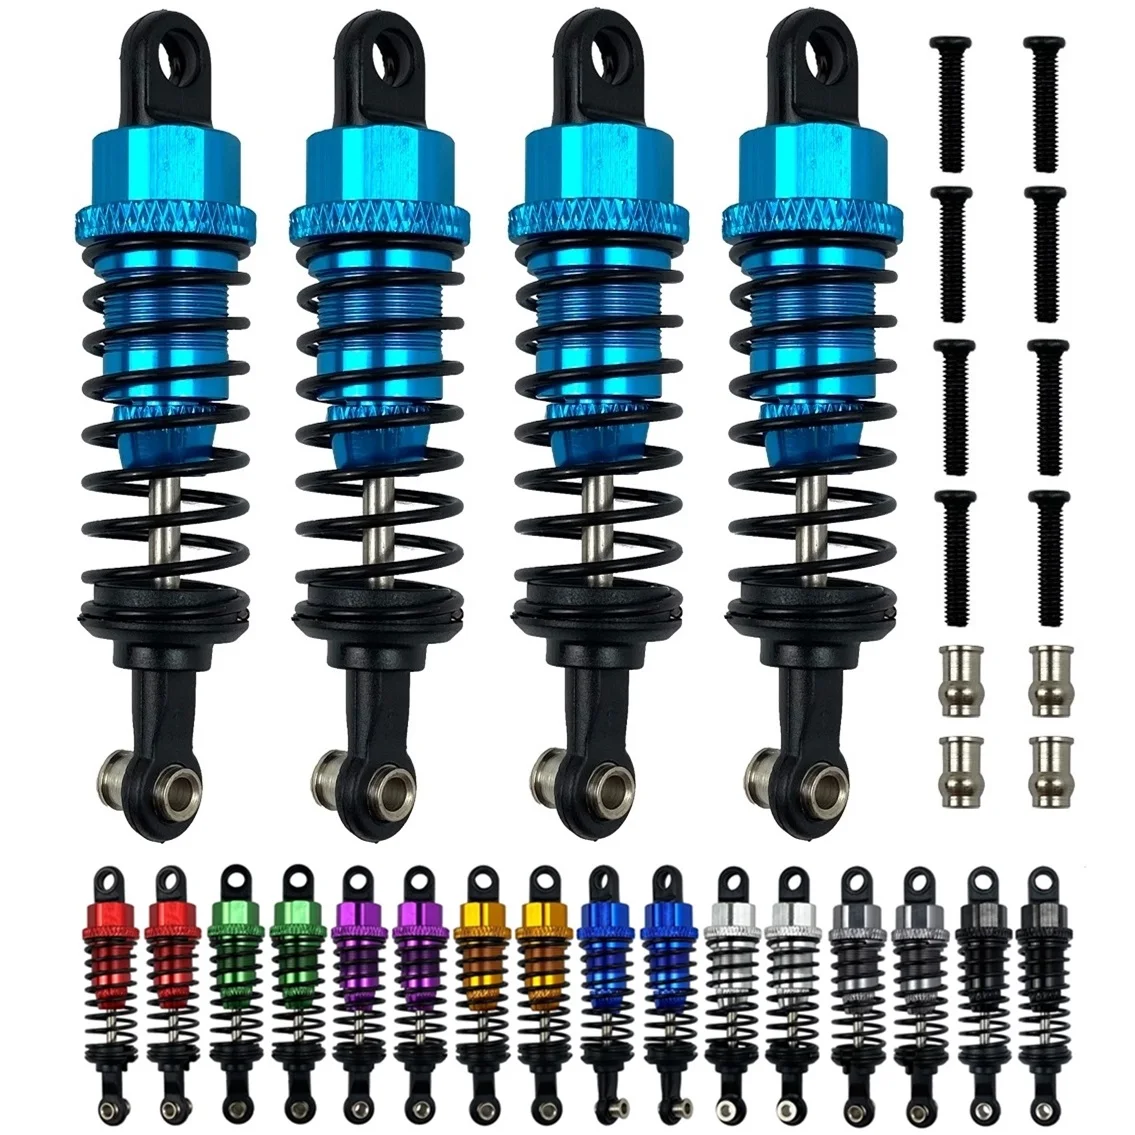 

Wltoys 184011 A959 A959-B A949 A969 A979 K929 Metal Oil Shock Absorber Damper for 1/18 RC Car Upgrades Parts Accessories